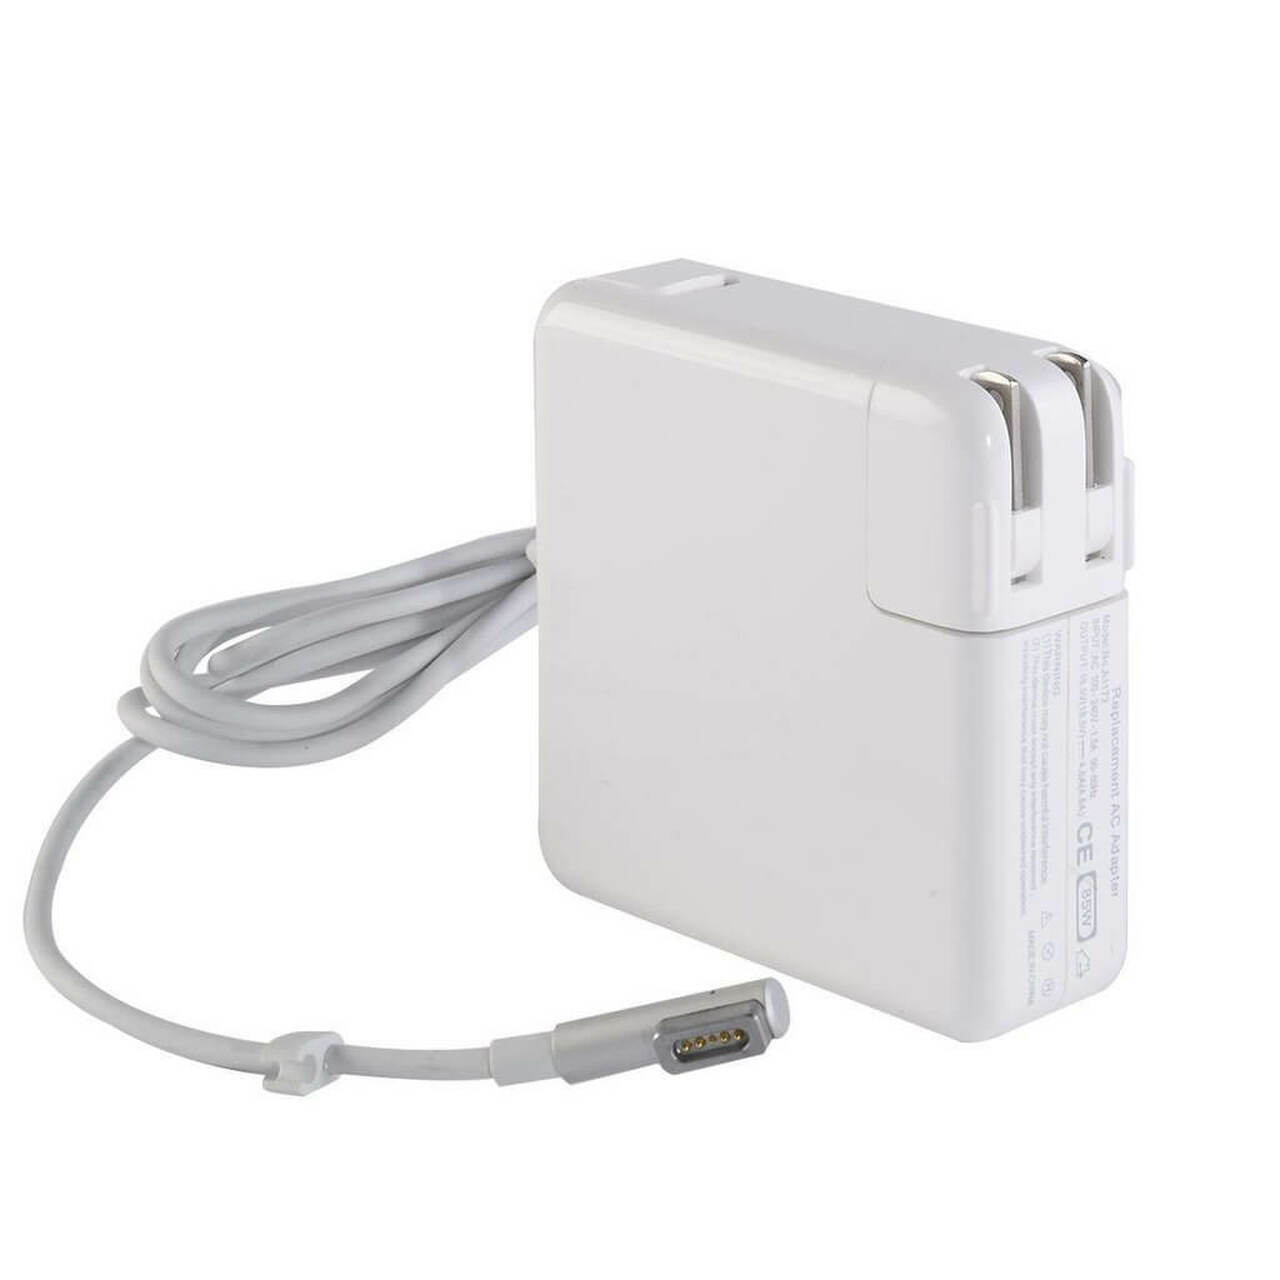 charger for 2012 macbook pro